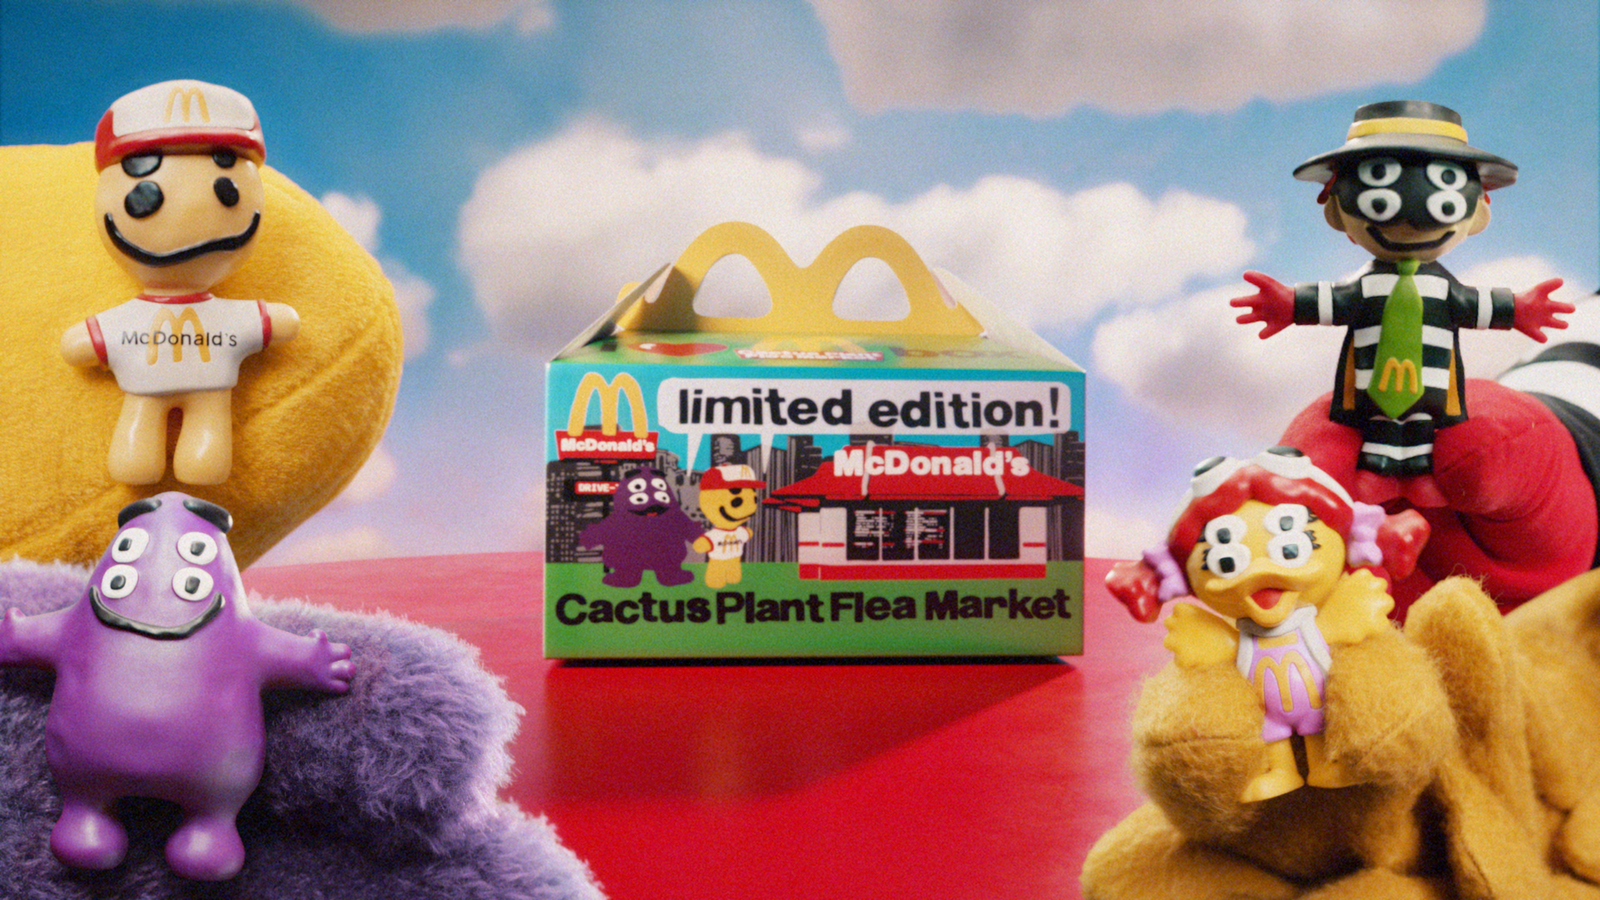 Four McDonald's figurines designed by Cactus Plant Flea Market encircle a Happy Meal placed on a red table against a sky-blue backdrop.